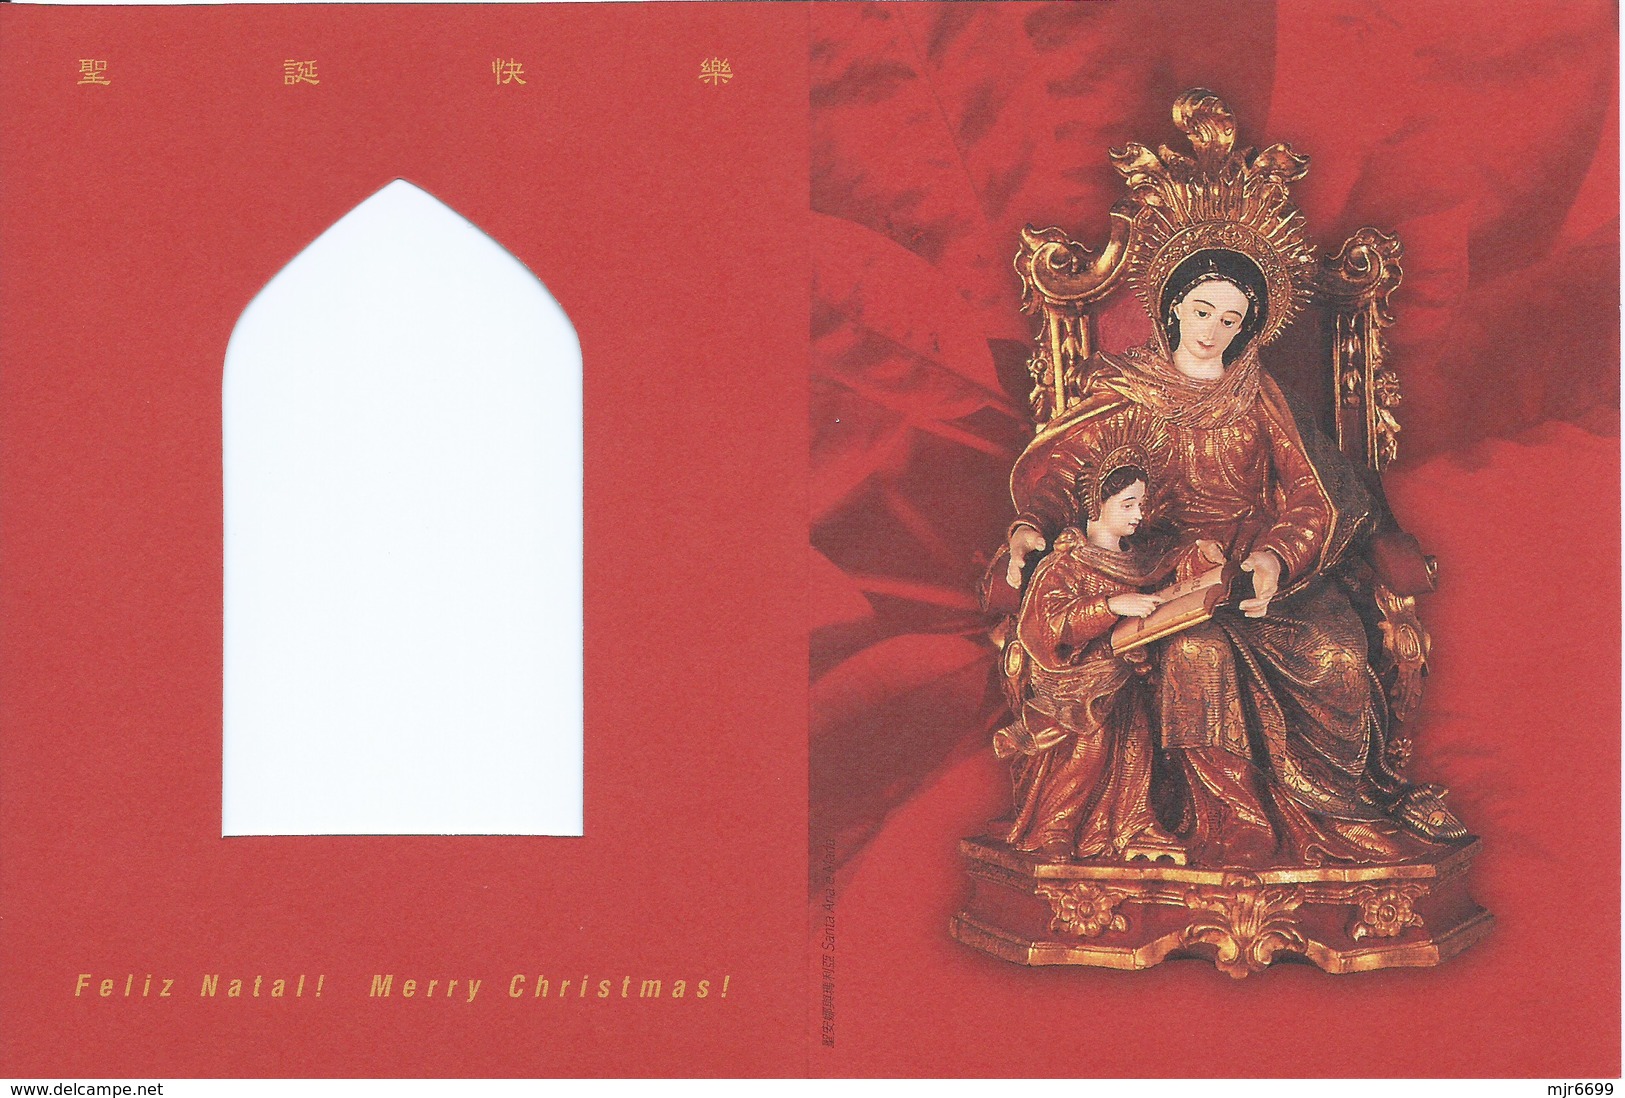 MACAU 2000 CHRISTMAS GREETING CARD & POSTAGE PAID COVER POST OFFICE CODE #BPD001 - Ganzsachen